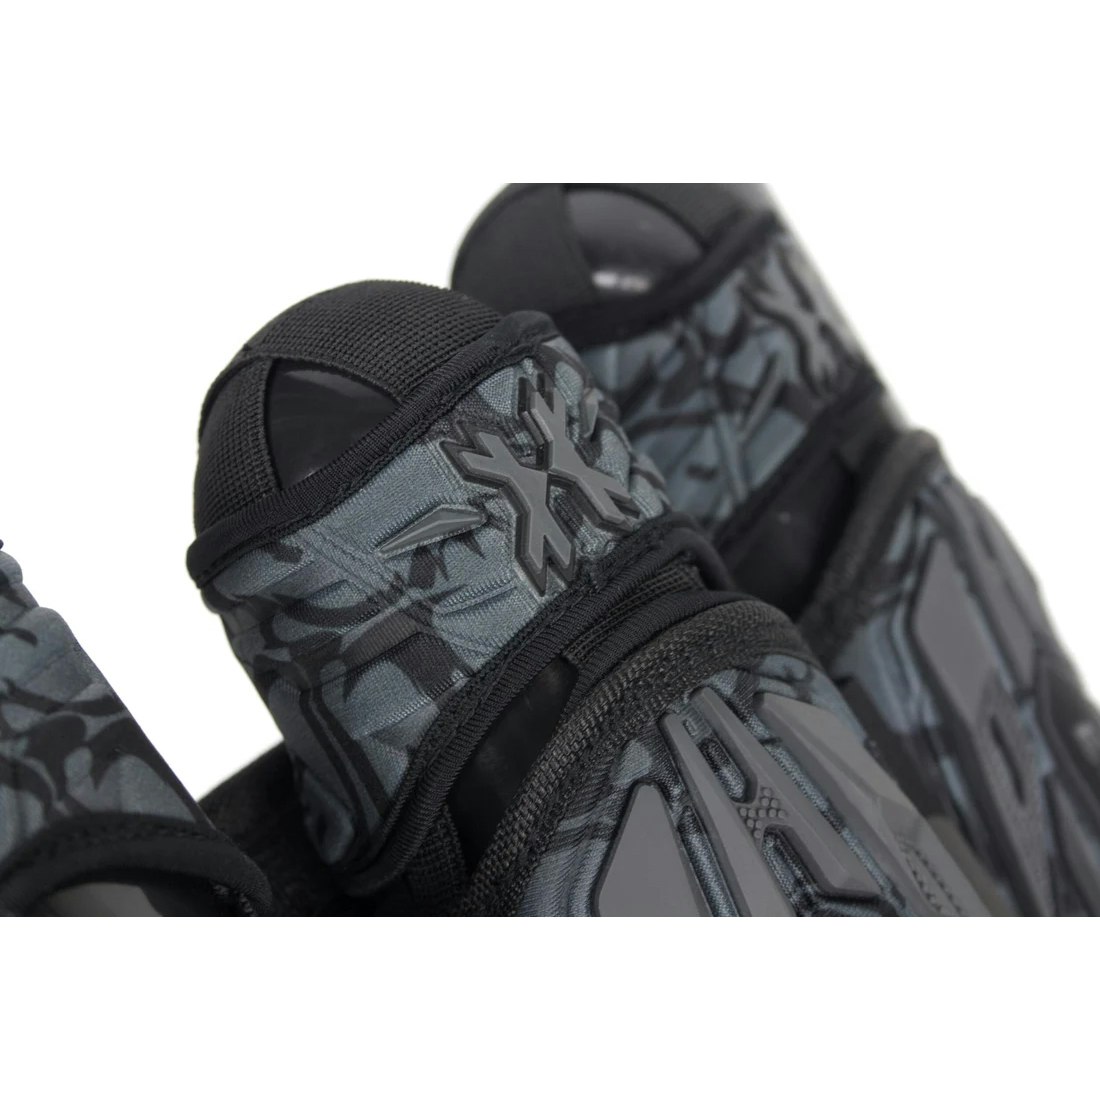 Planet Eclipse x HK Army ZeroG 2.0 Pack 5+4+4 - Fighter Grey